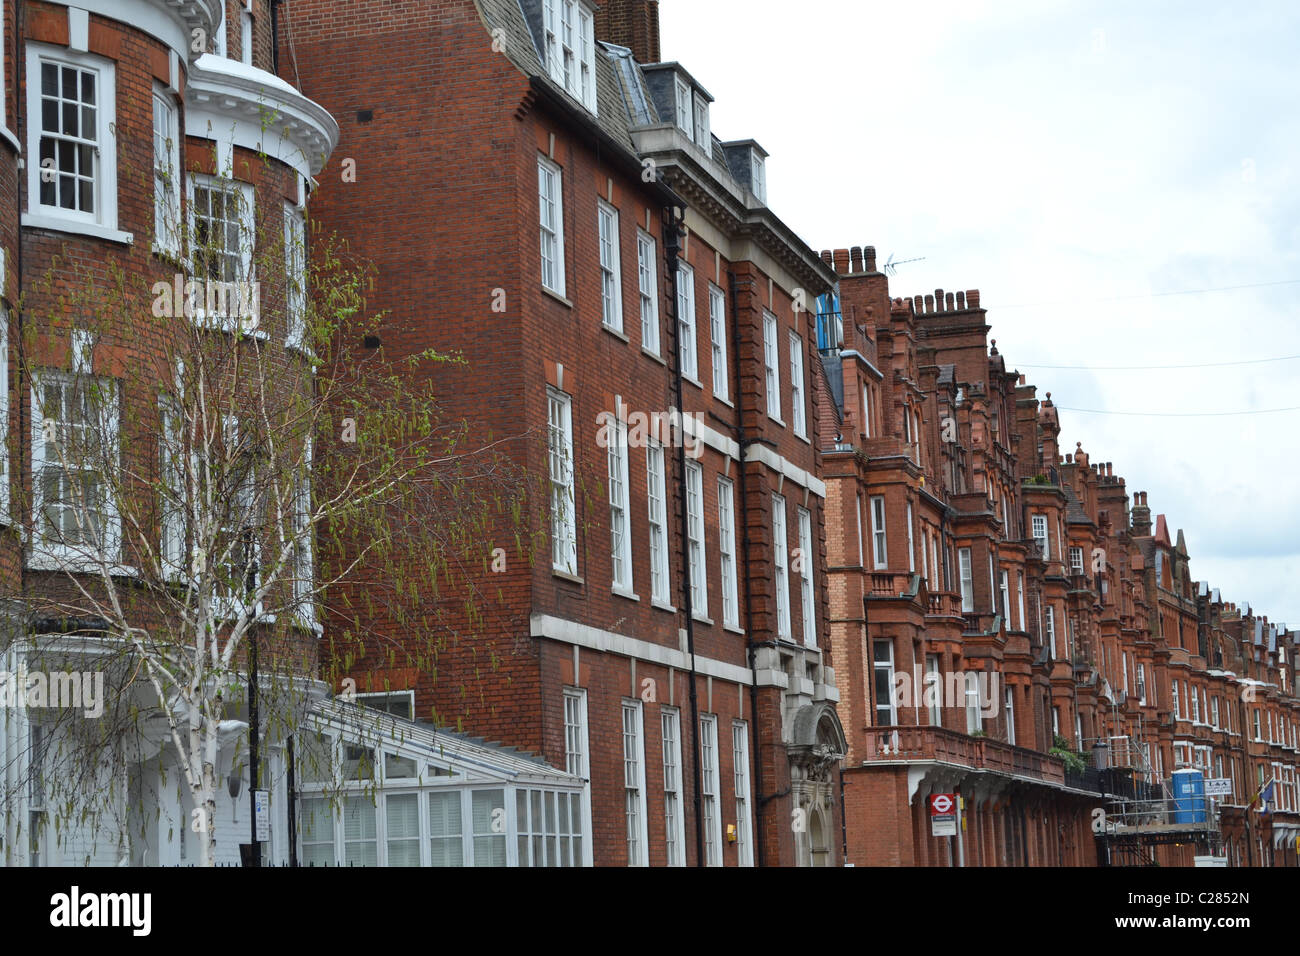 Red brick traditional facades in Knightsbridge, London, UK ARTIFEX LUCIS Stock Photo